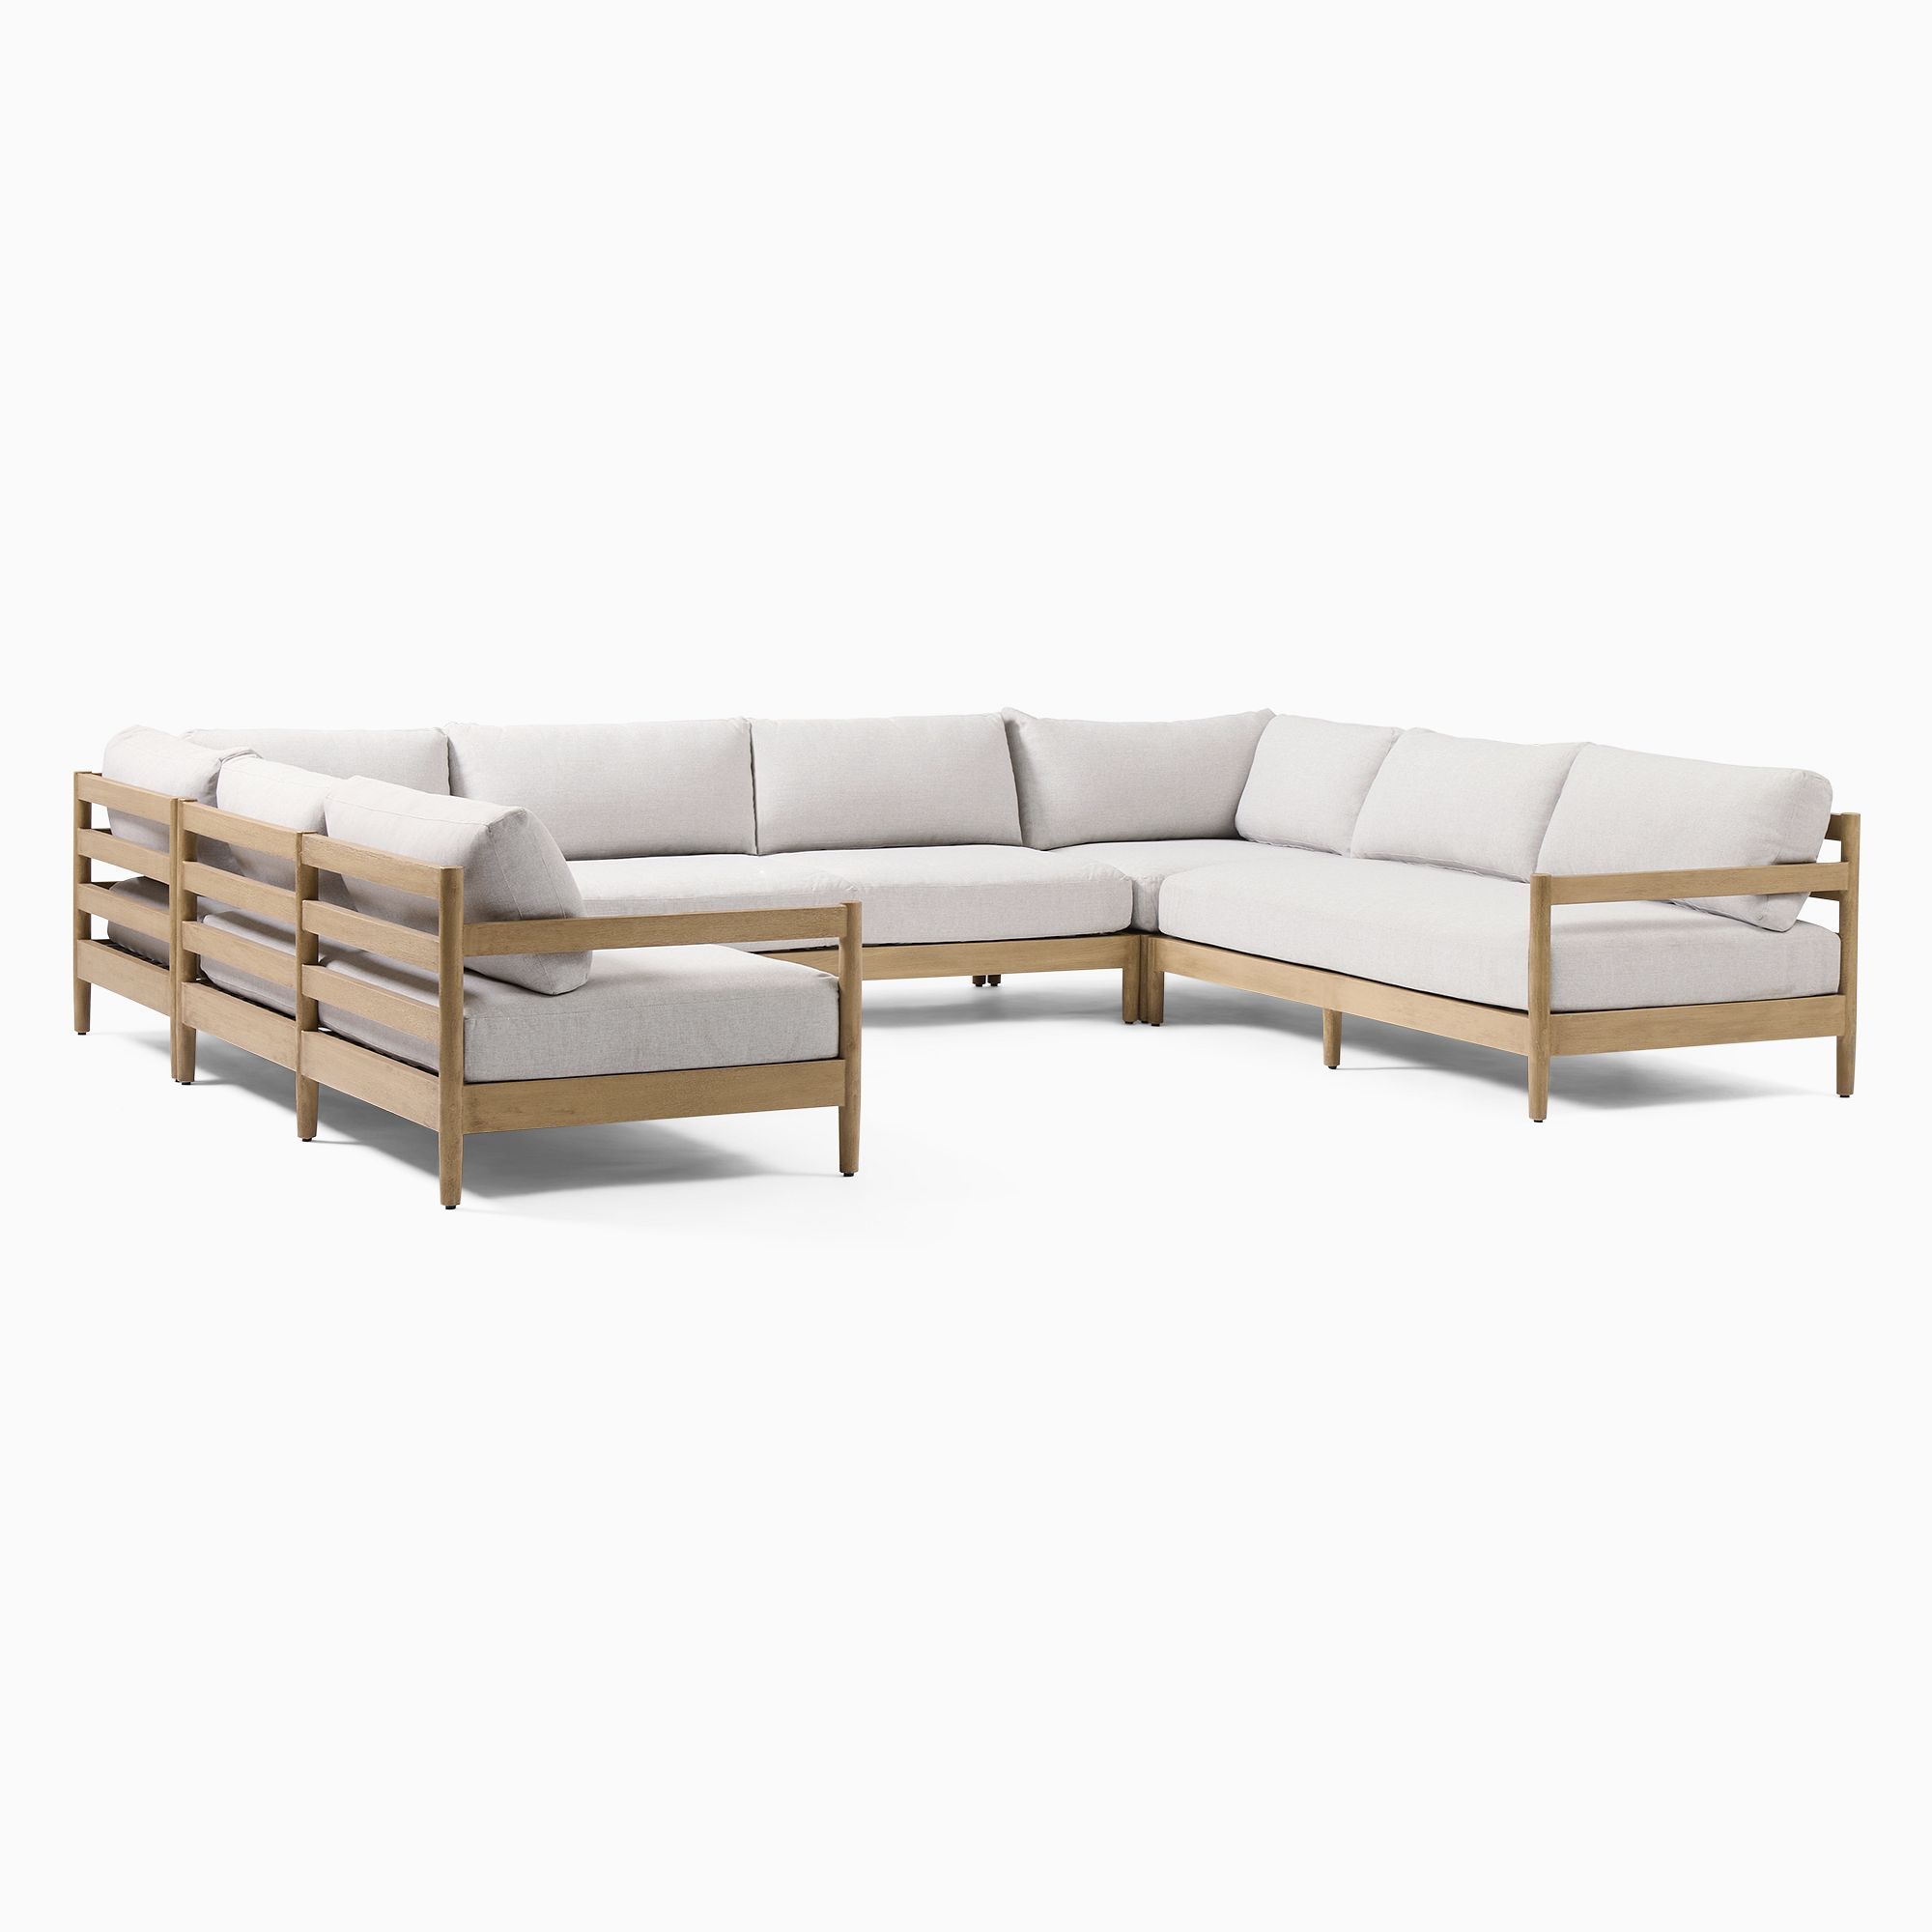 Hargrove Outdoor -Piece U-Shaped Sectional (131") | West Elm